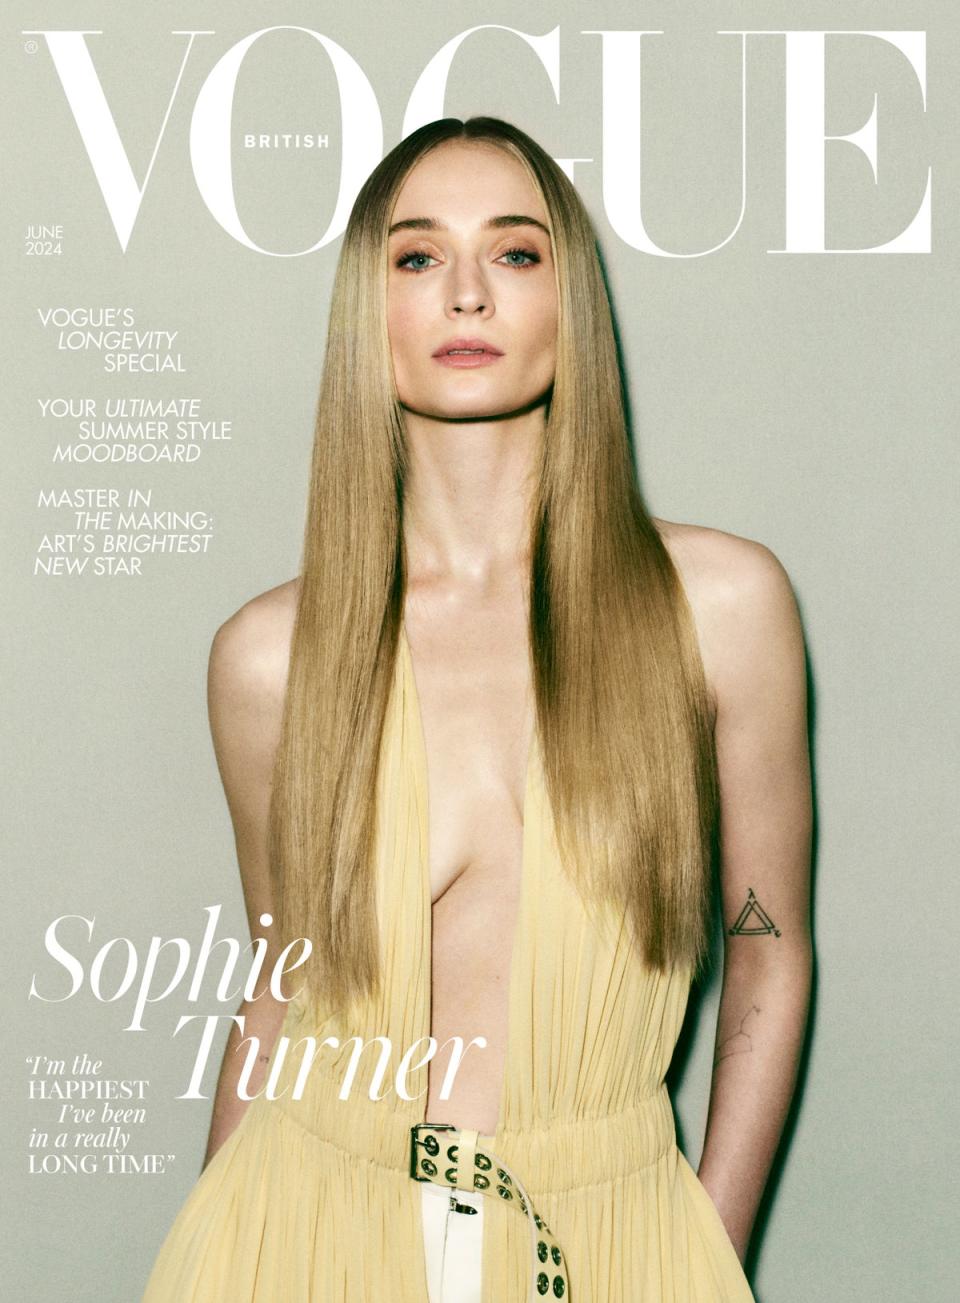 Turner on the cover of the June issue of British Vogue (Mikael Jansson)